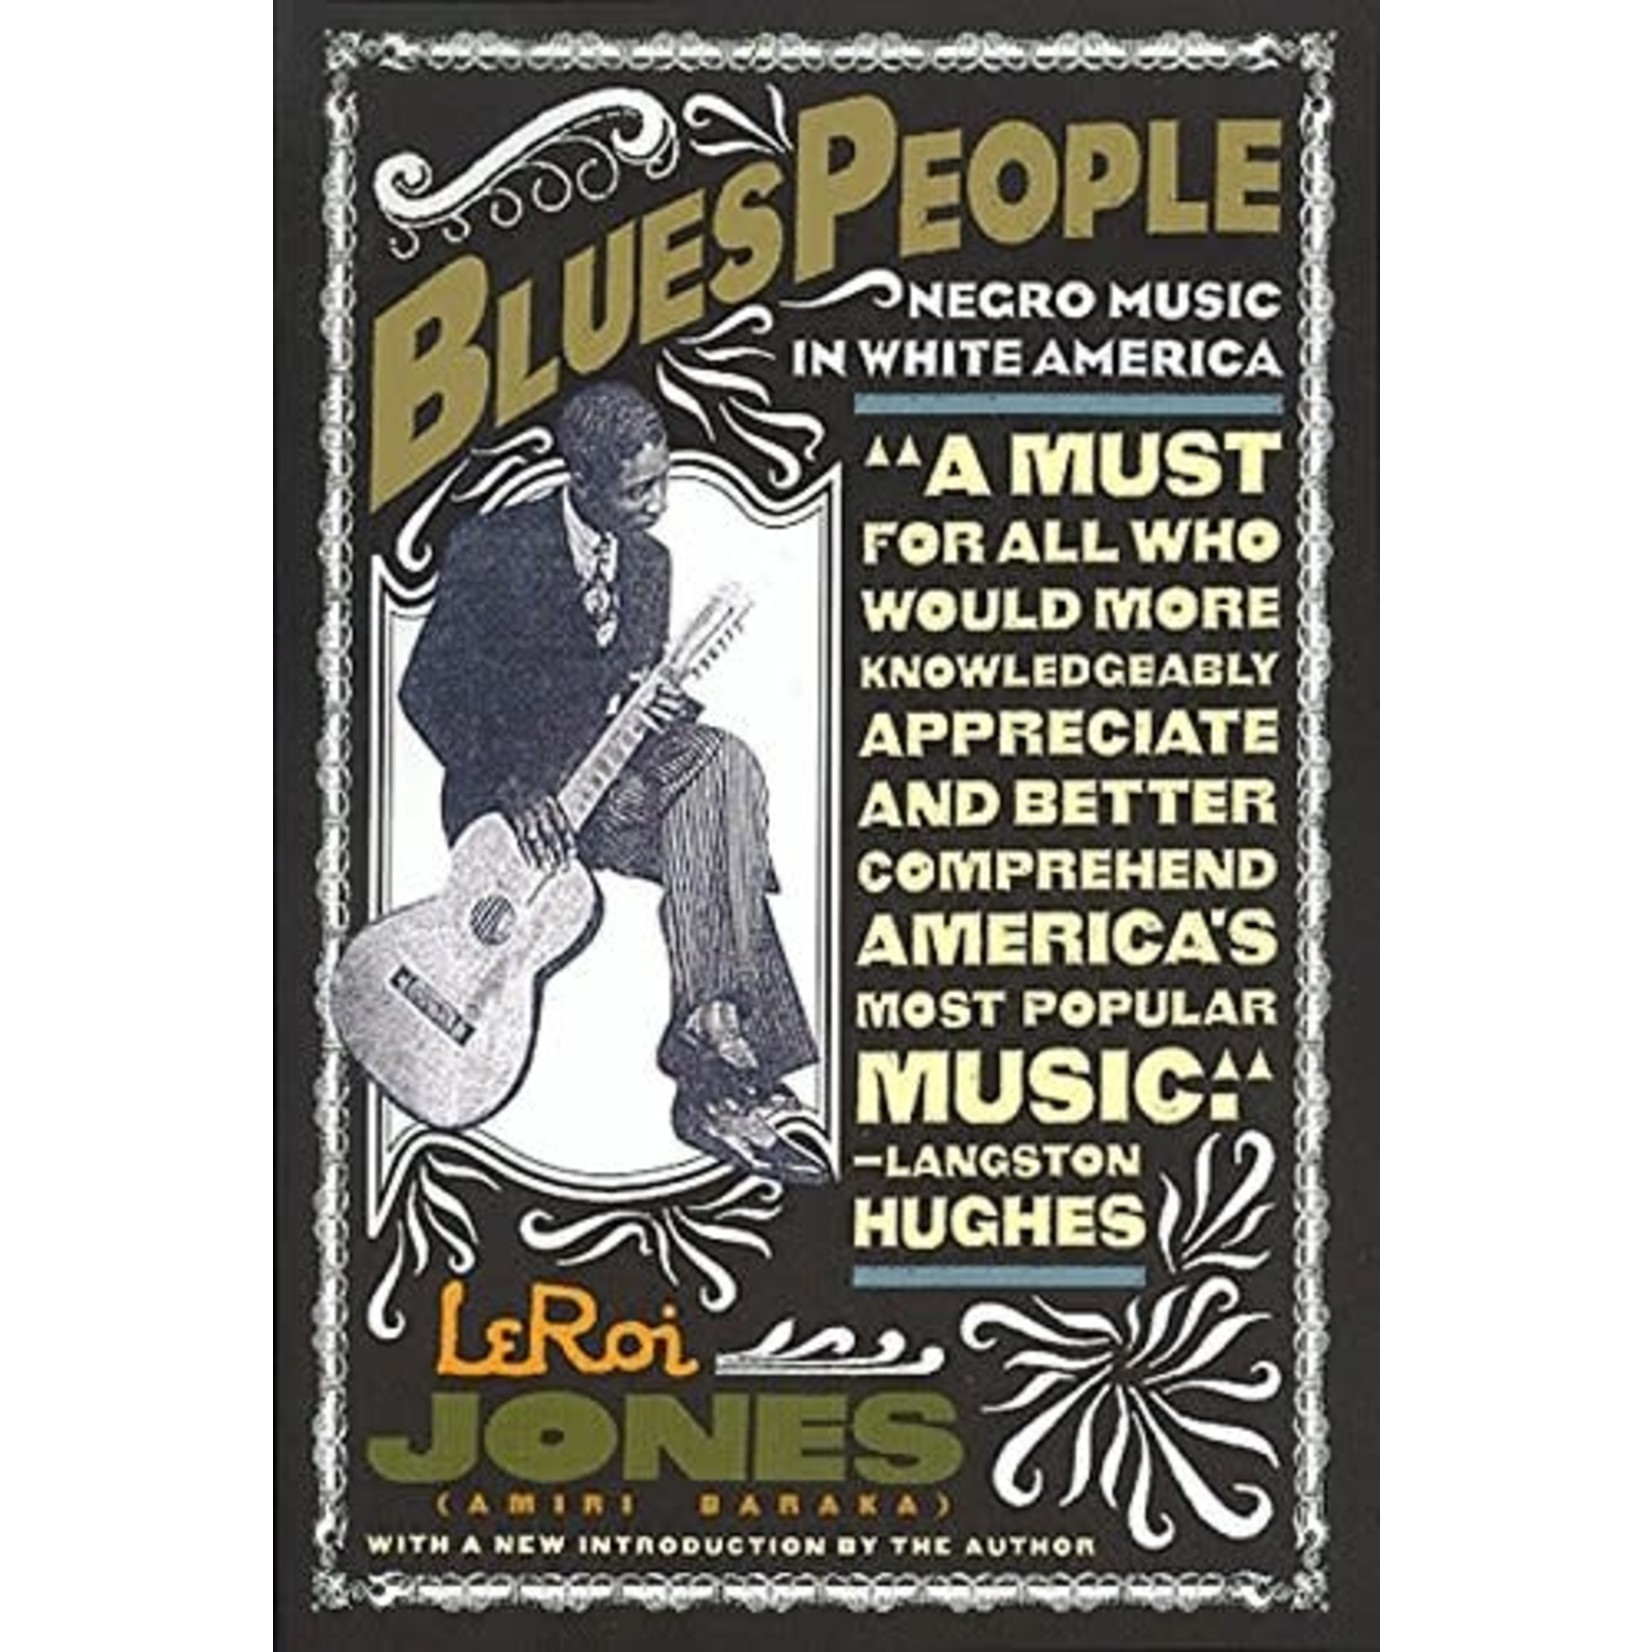 Blues People: The Negro Music In White America [Book]